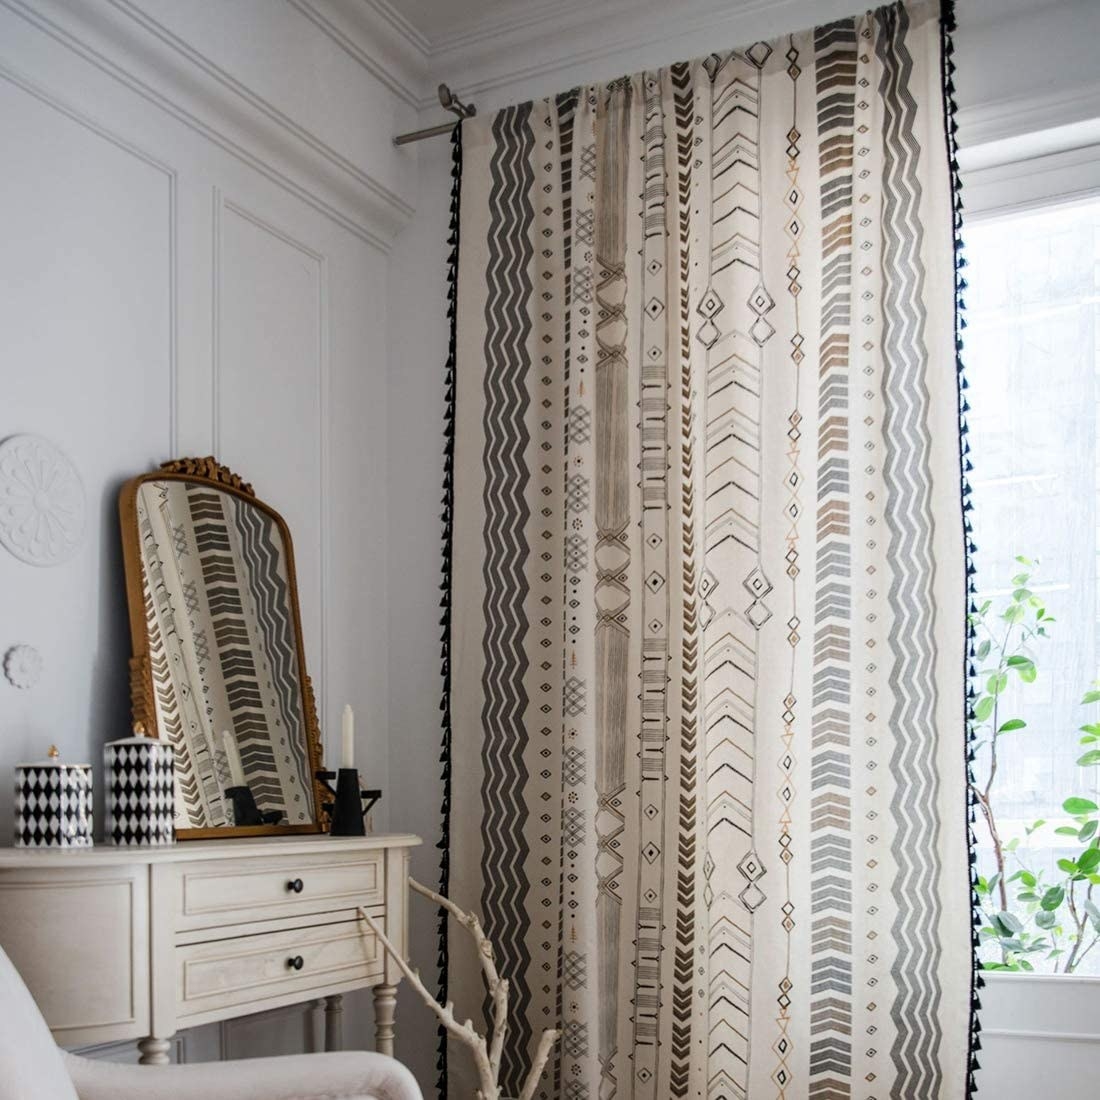 Geometric curtain with tassels on the edges 